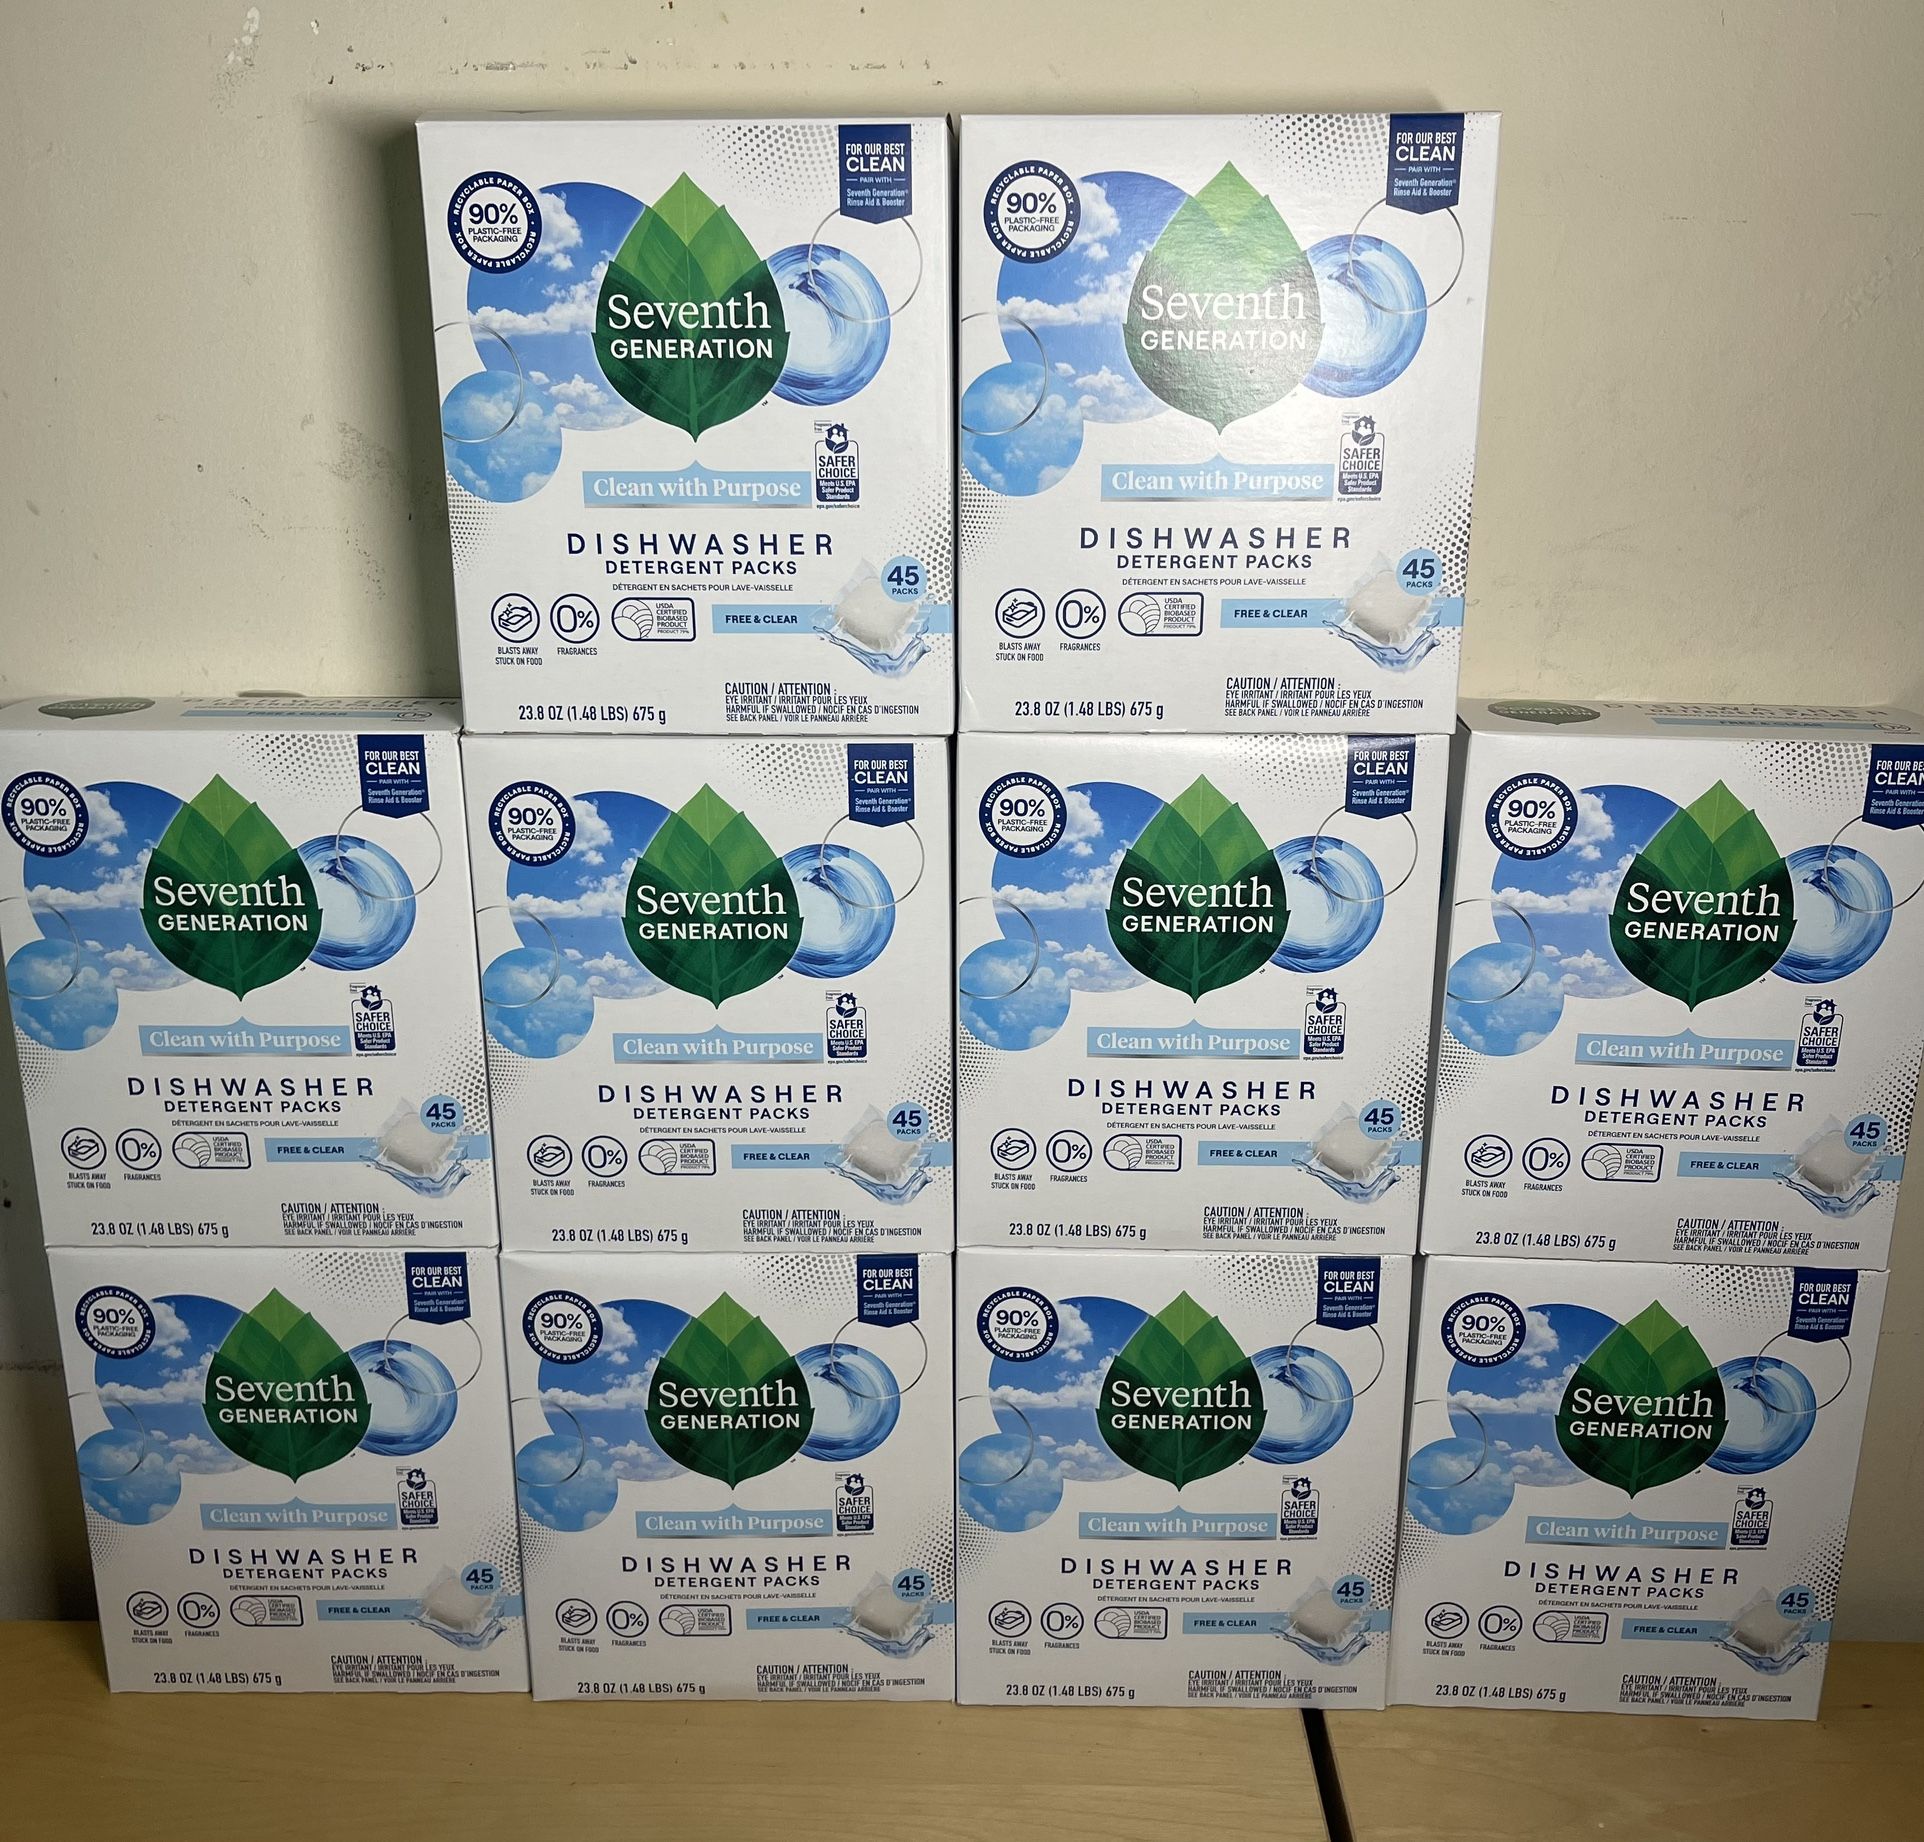 NEW Seventh Generation Dishwasher Detergent Packs Free & Clear - 45 ct